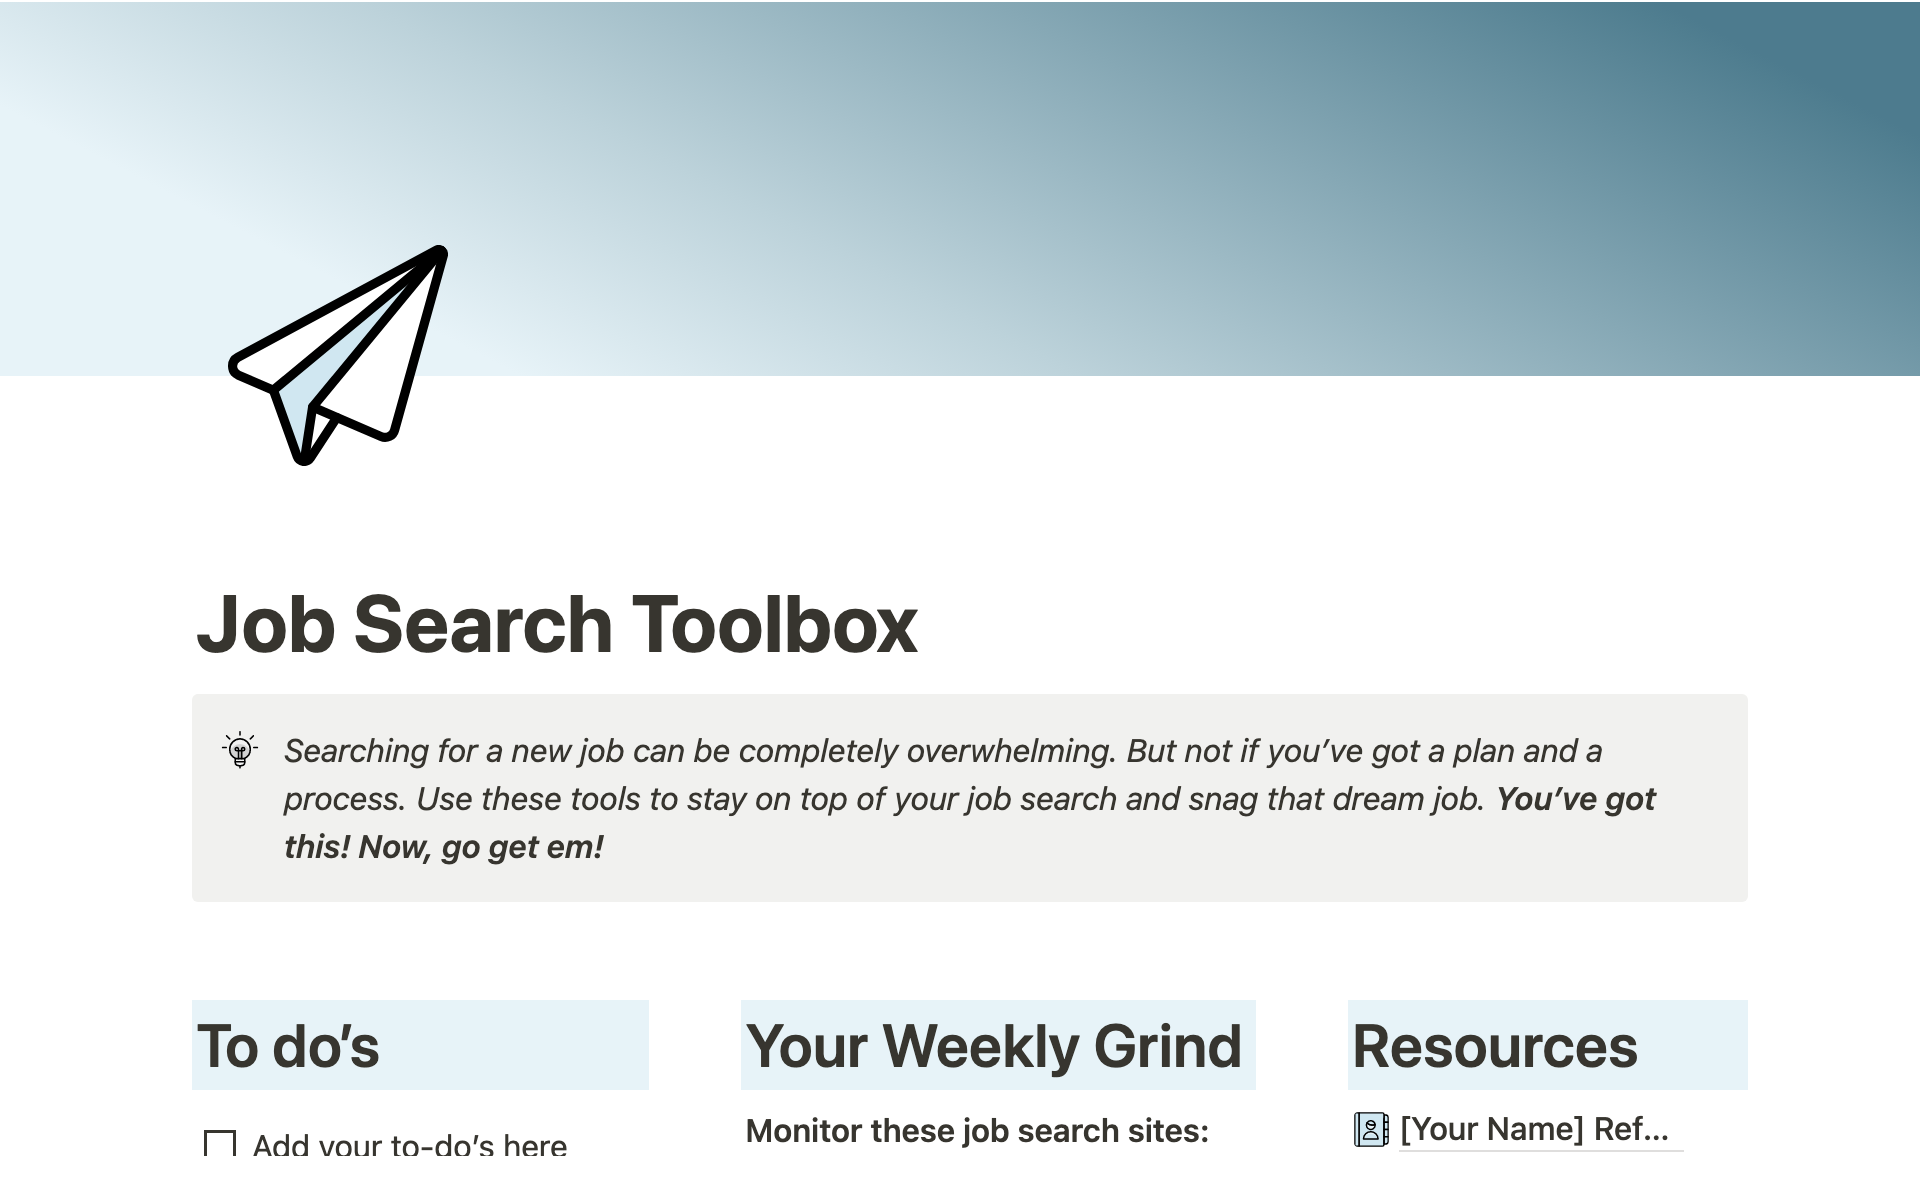 Use these tools to stay on top of your job search and land that dream job.